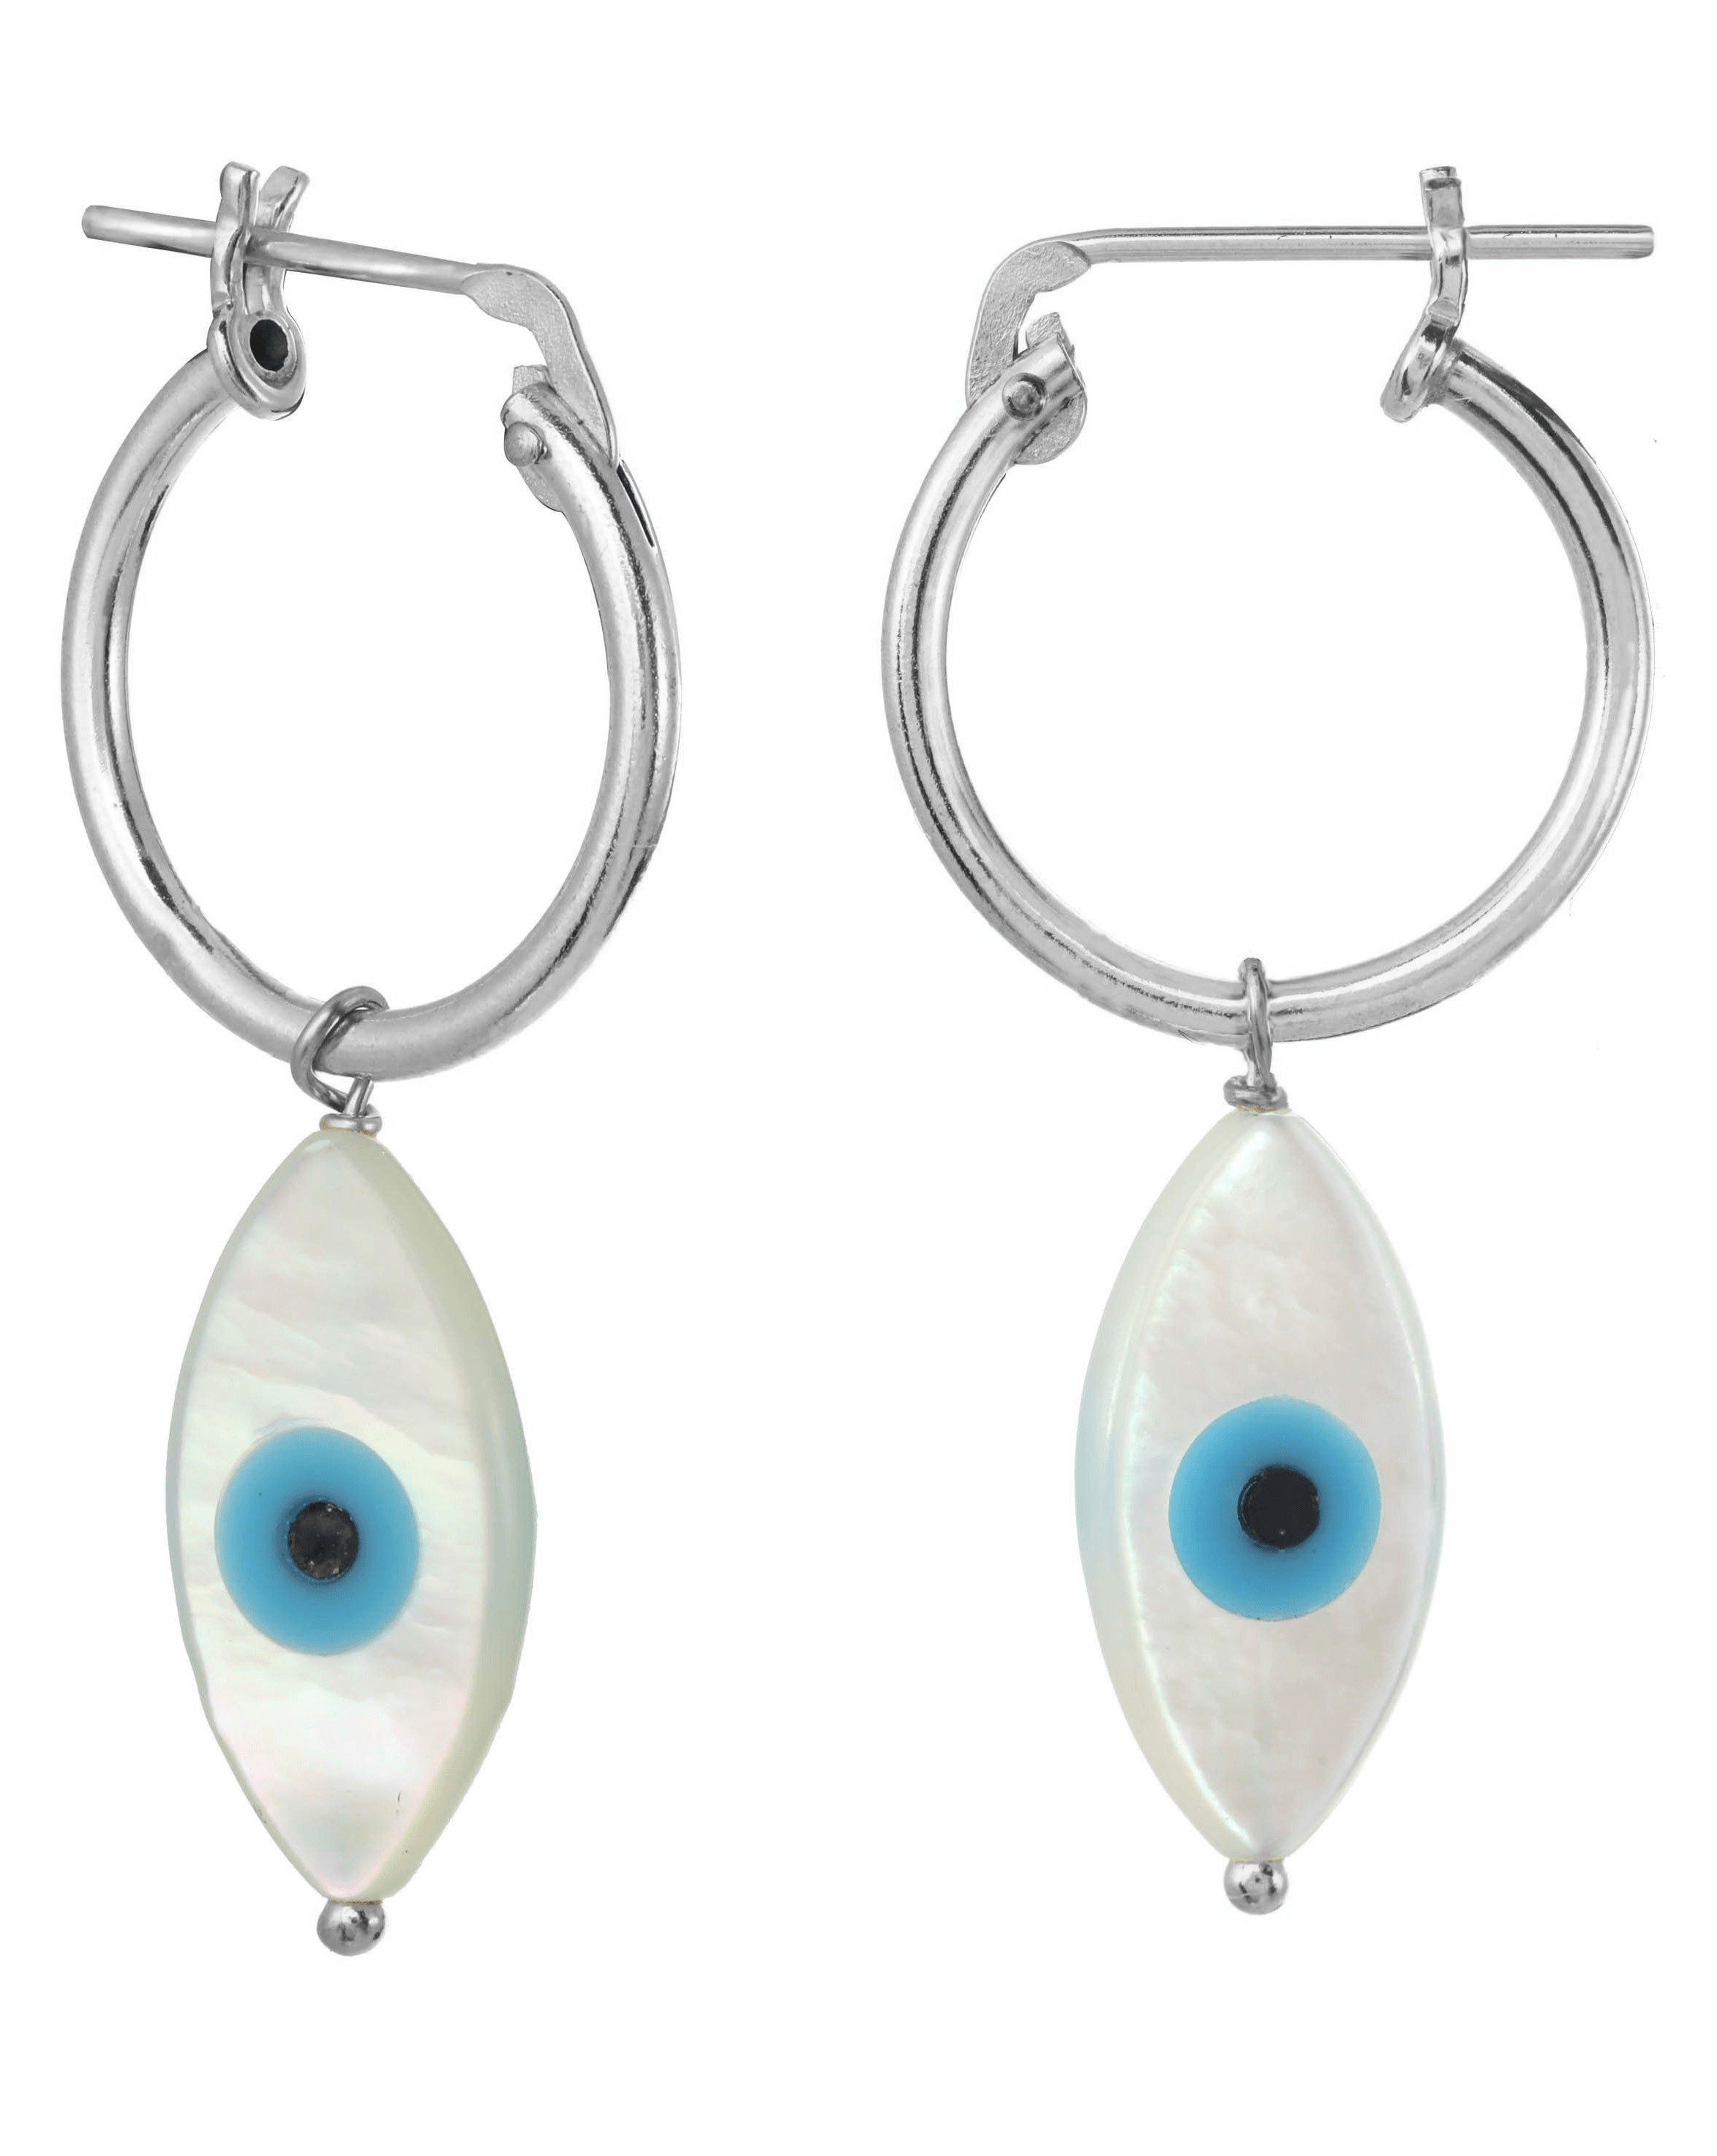 Ima Hoop Earrings by KOZAKH. 15mm snap closure hoop earrings, crafted in Sterling Silver, featuring hand carved Mother of Pearl Evil Eye charm.